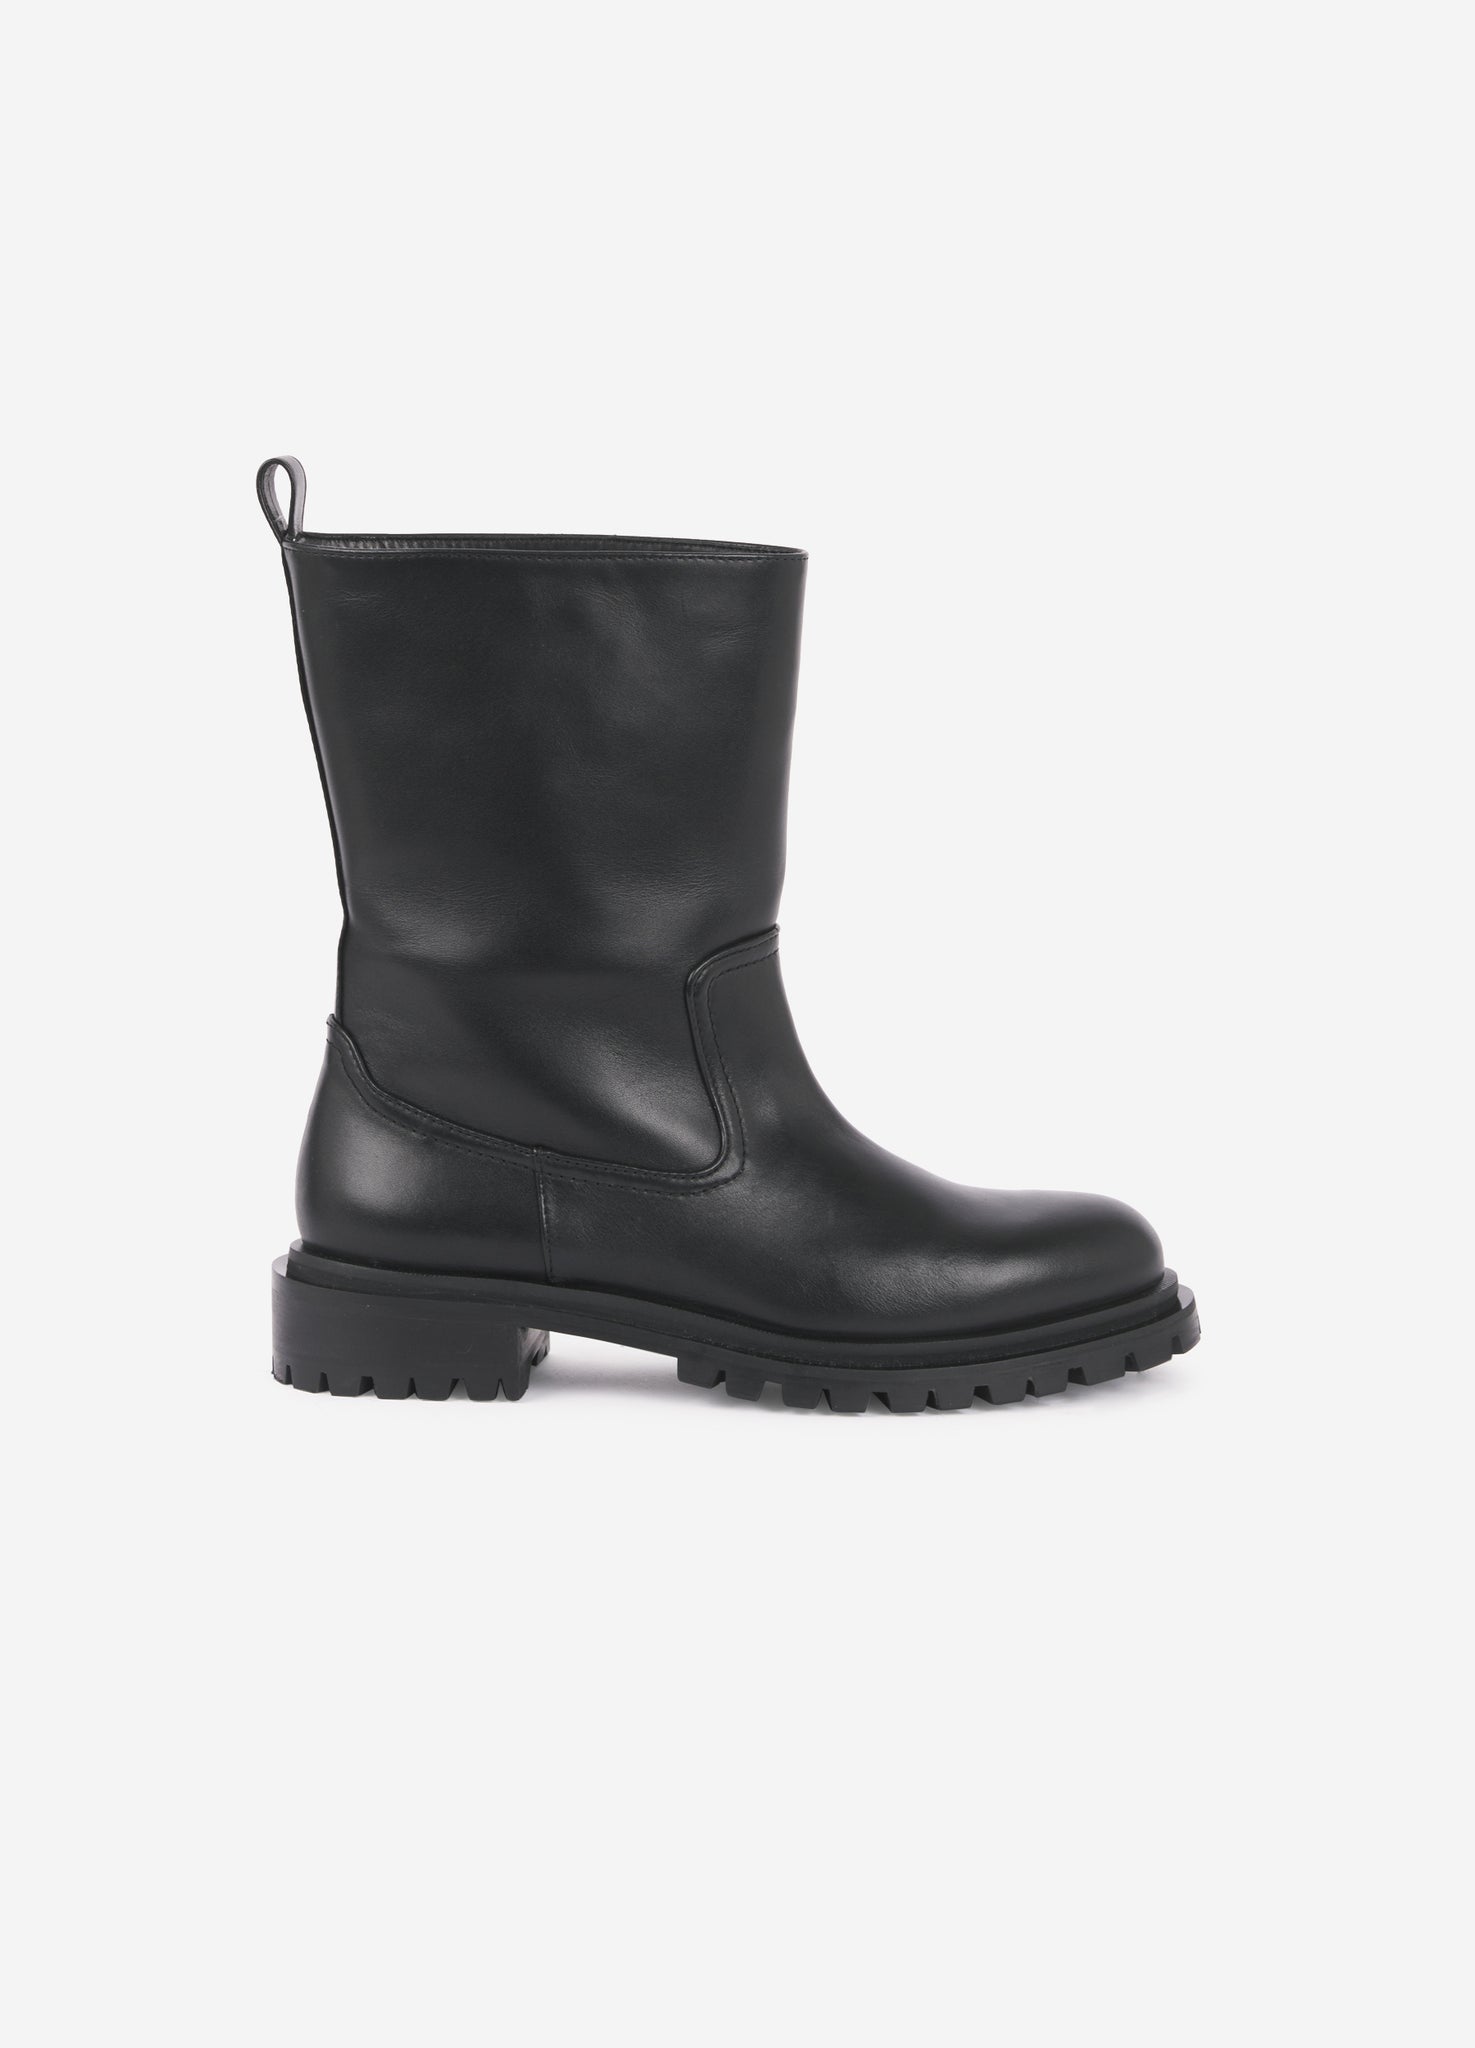 Short black leather boots